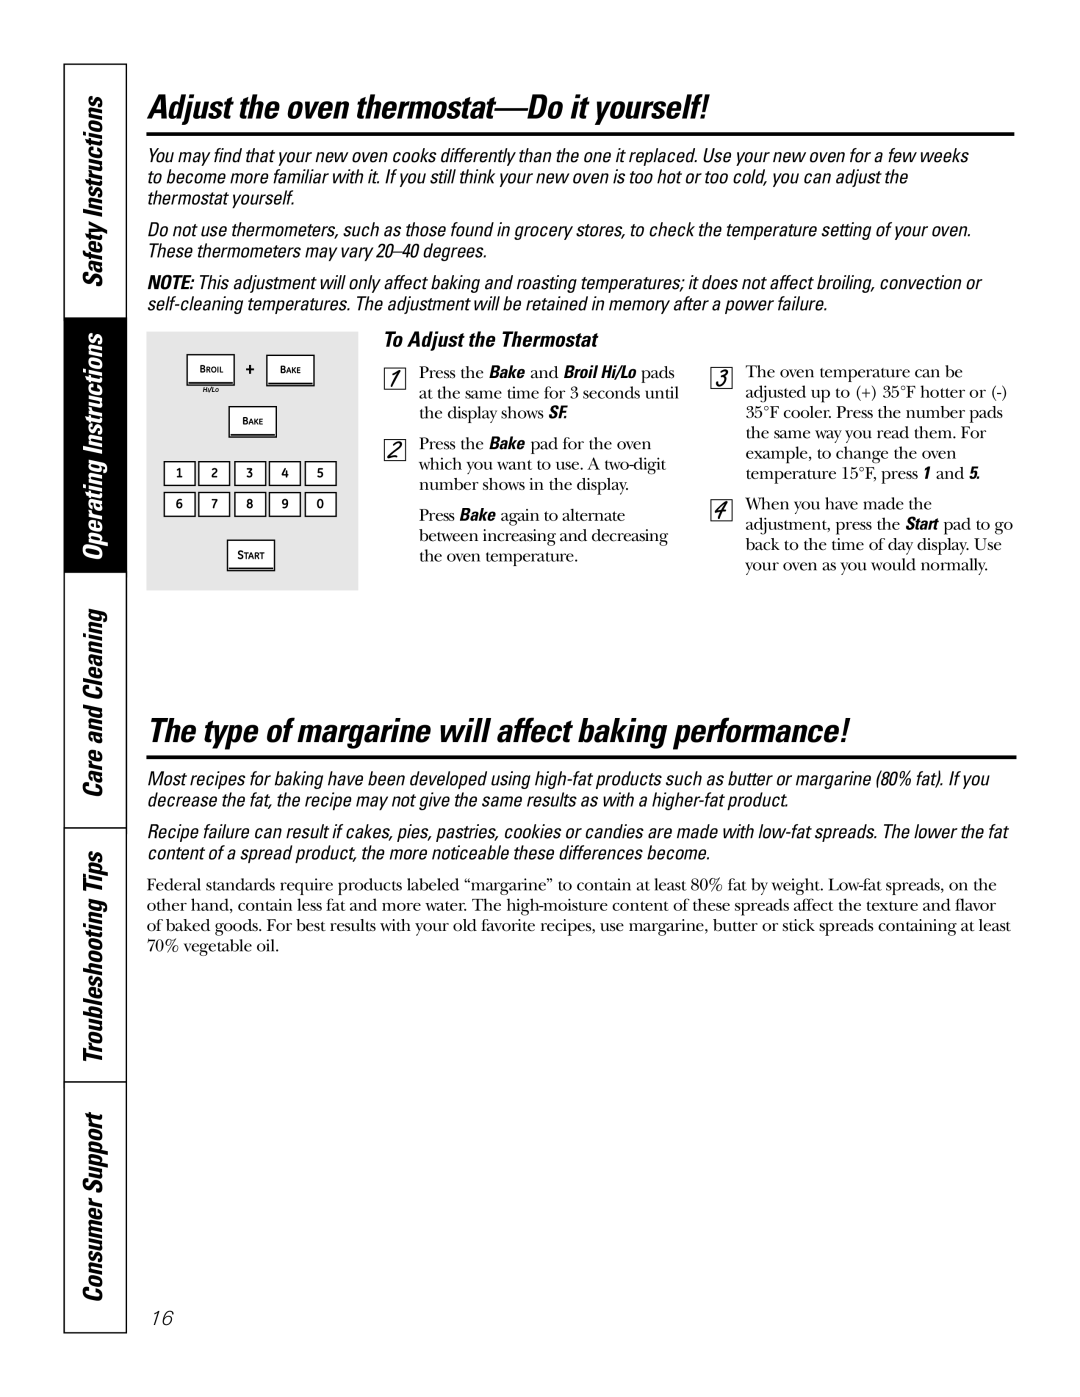 GE PK916 owner manual Adjust the oven thermostat-Doit yourself, Safety Instructions, Cleaning Operating Instructions 